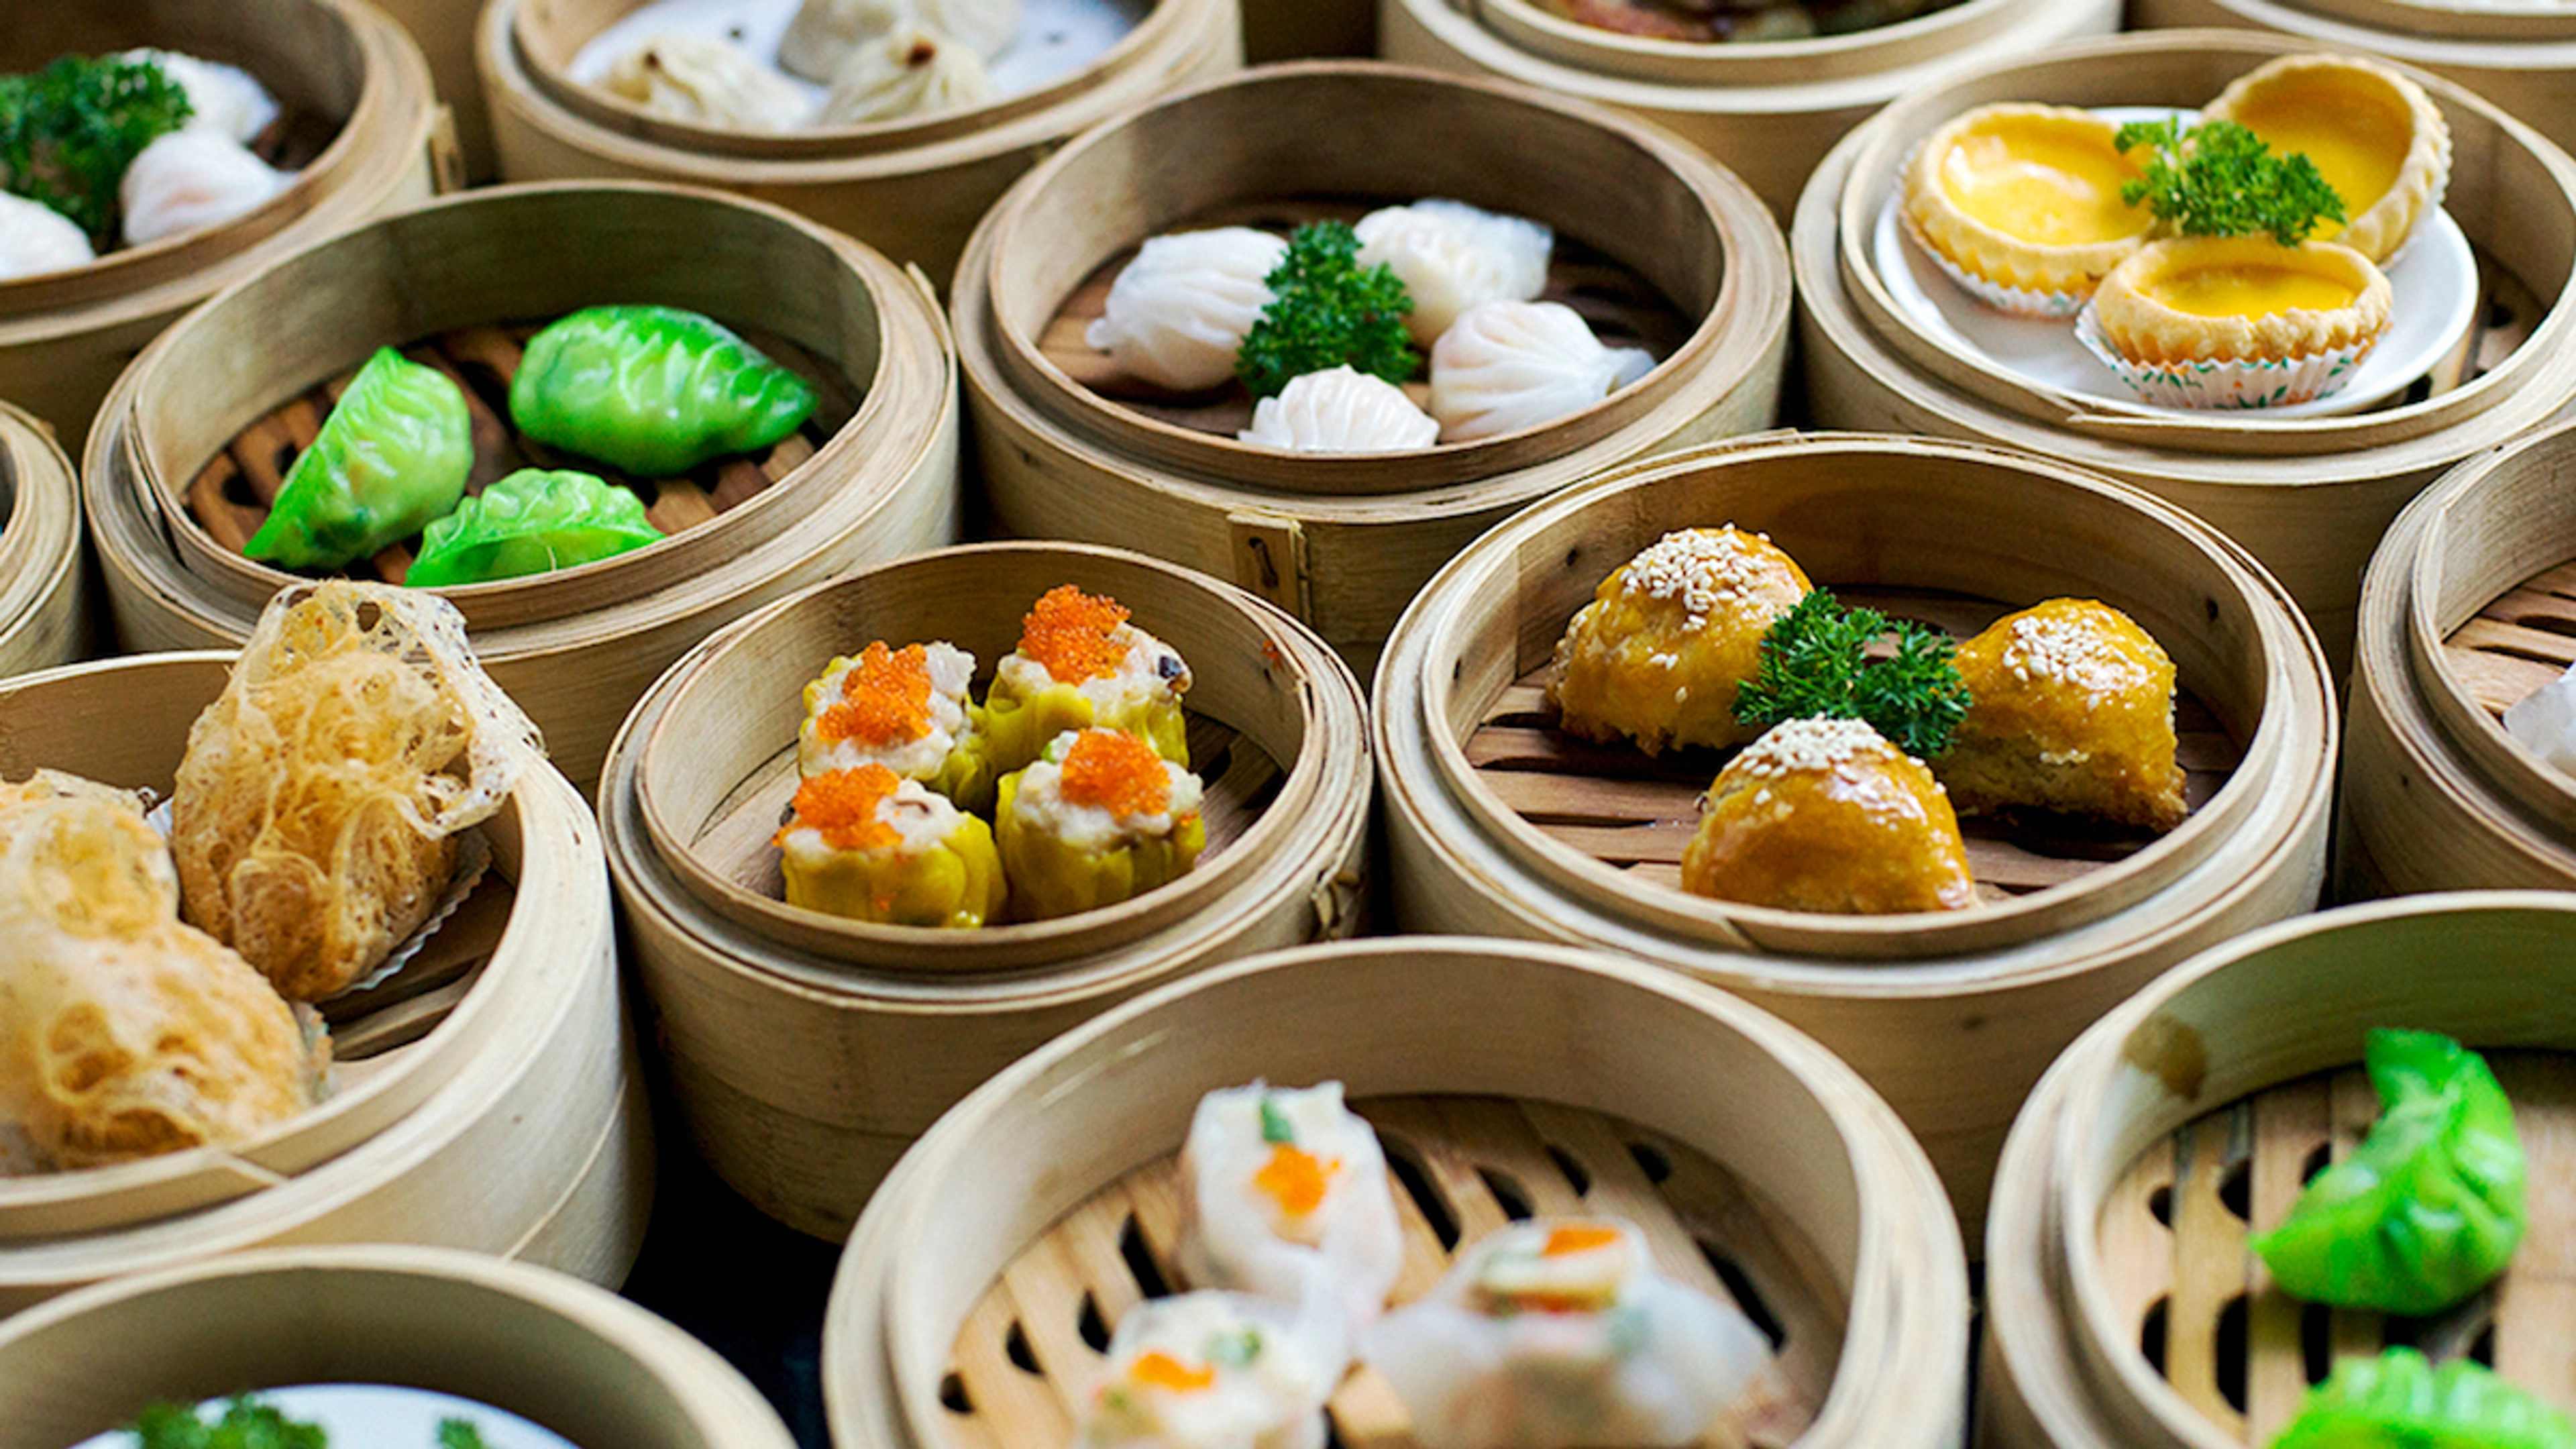 Introducing the Top 5 Dim Sum Restaurants in District 5 That Food Connoisseurs Must Try